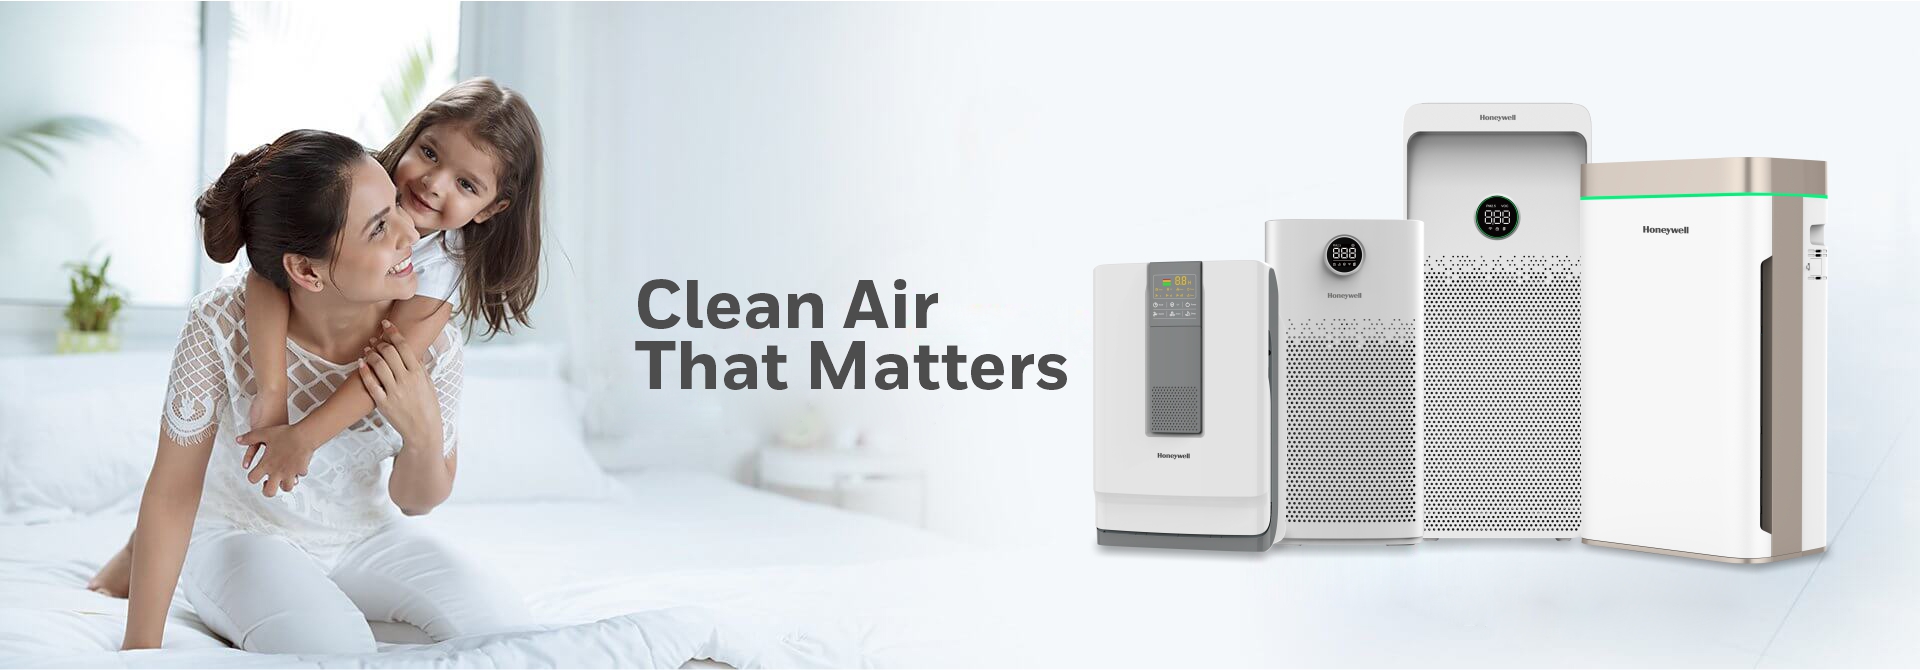 Air Purifiers – Honeywell Connection